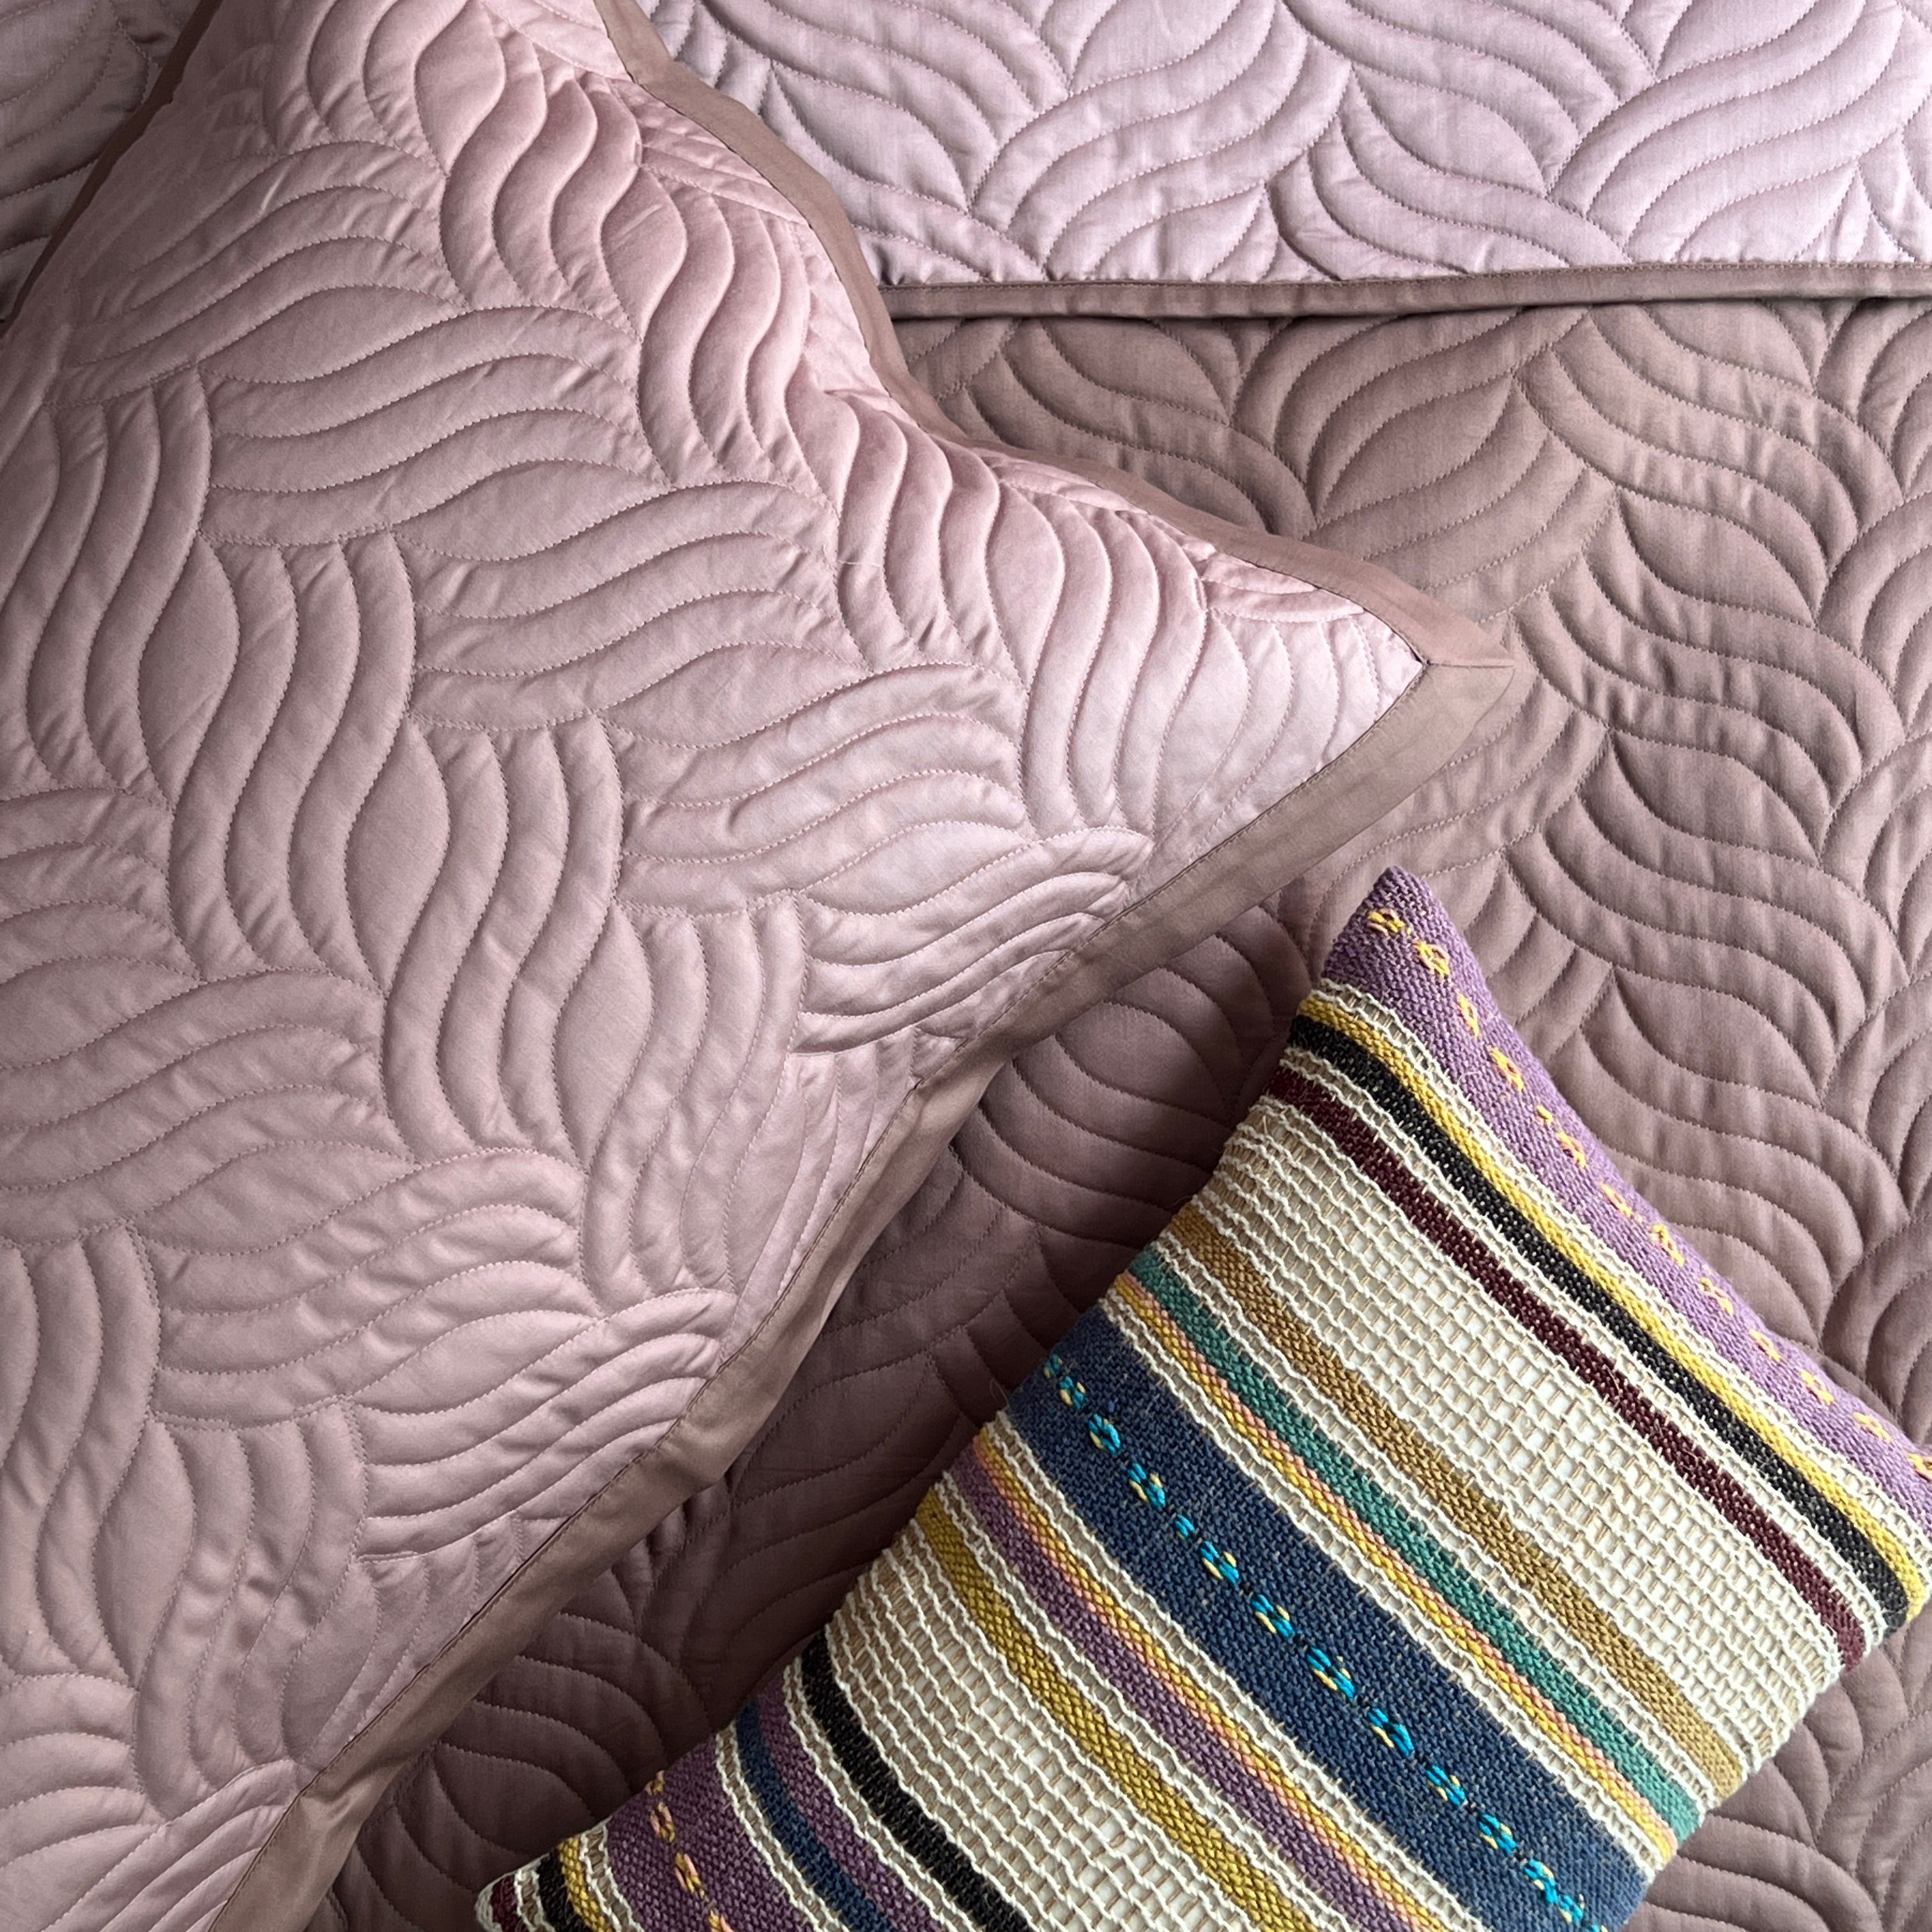 Quilted Brandy Rose and Old Rose Comber Reversible Bedspread